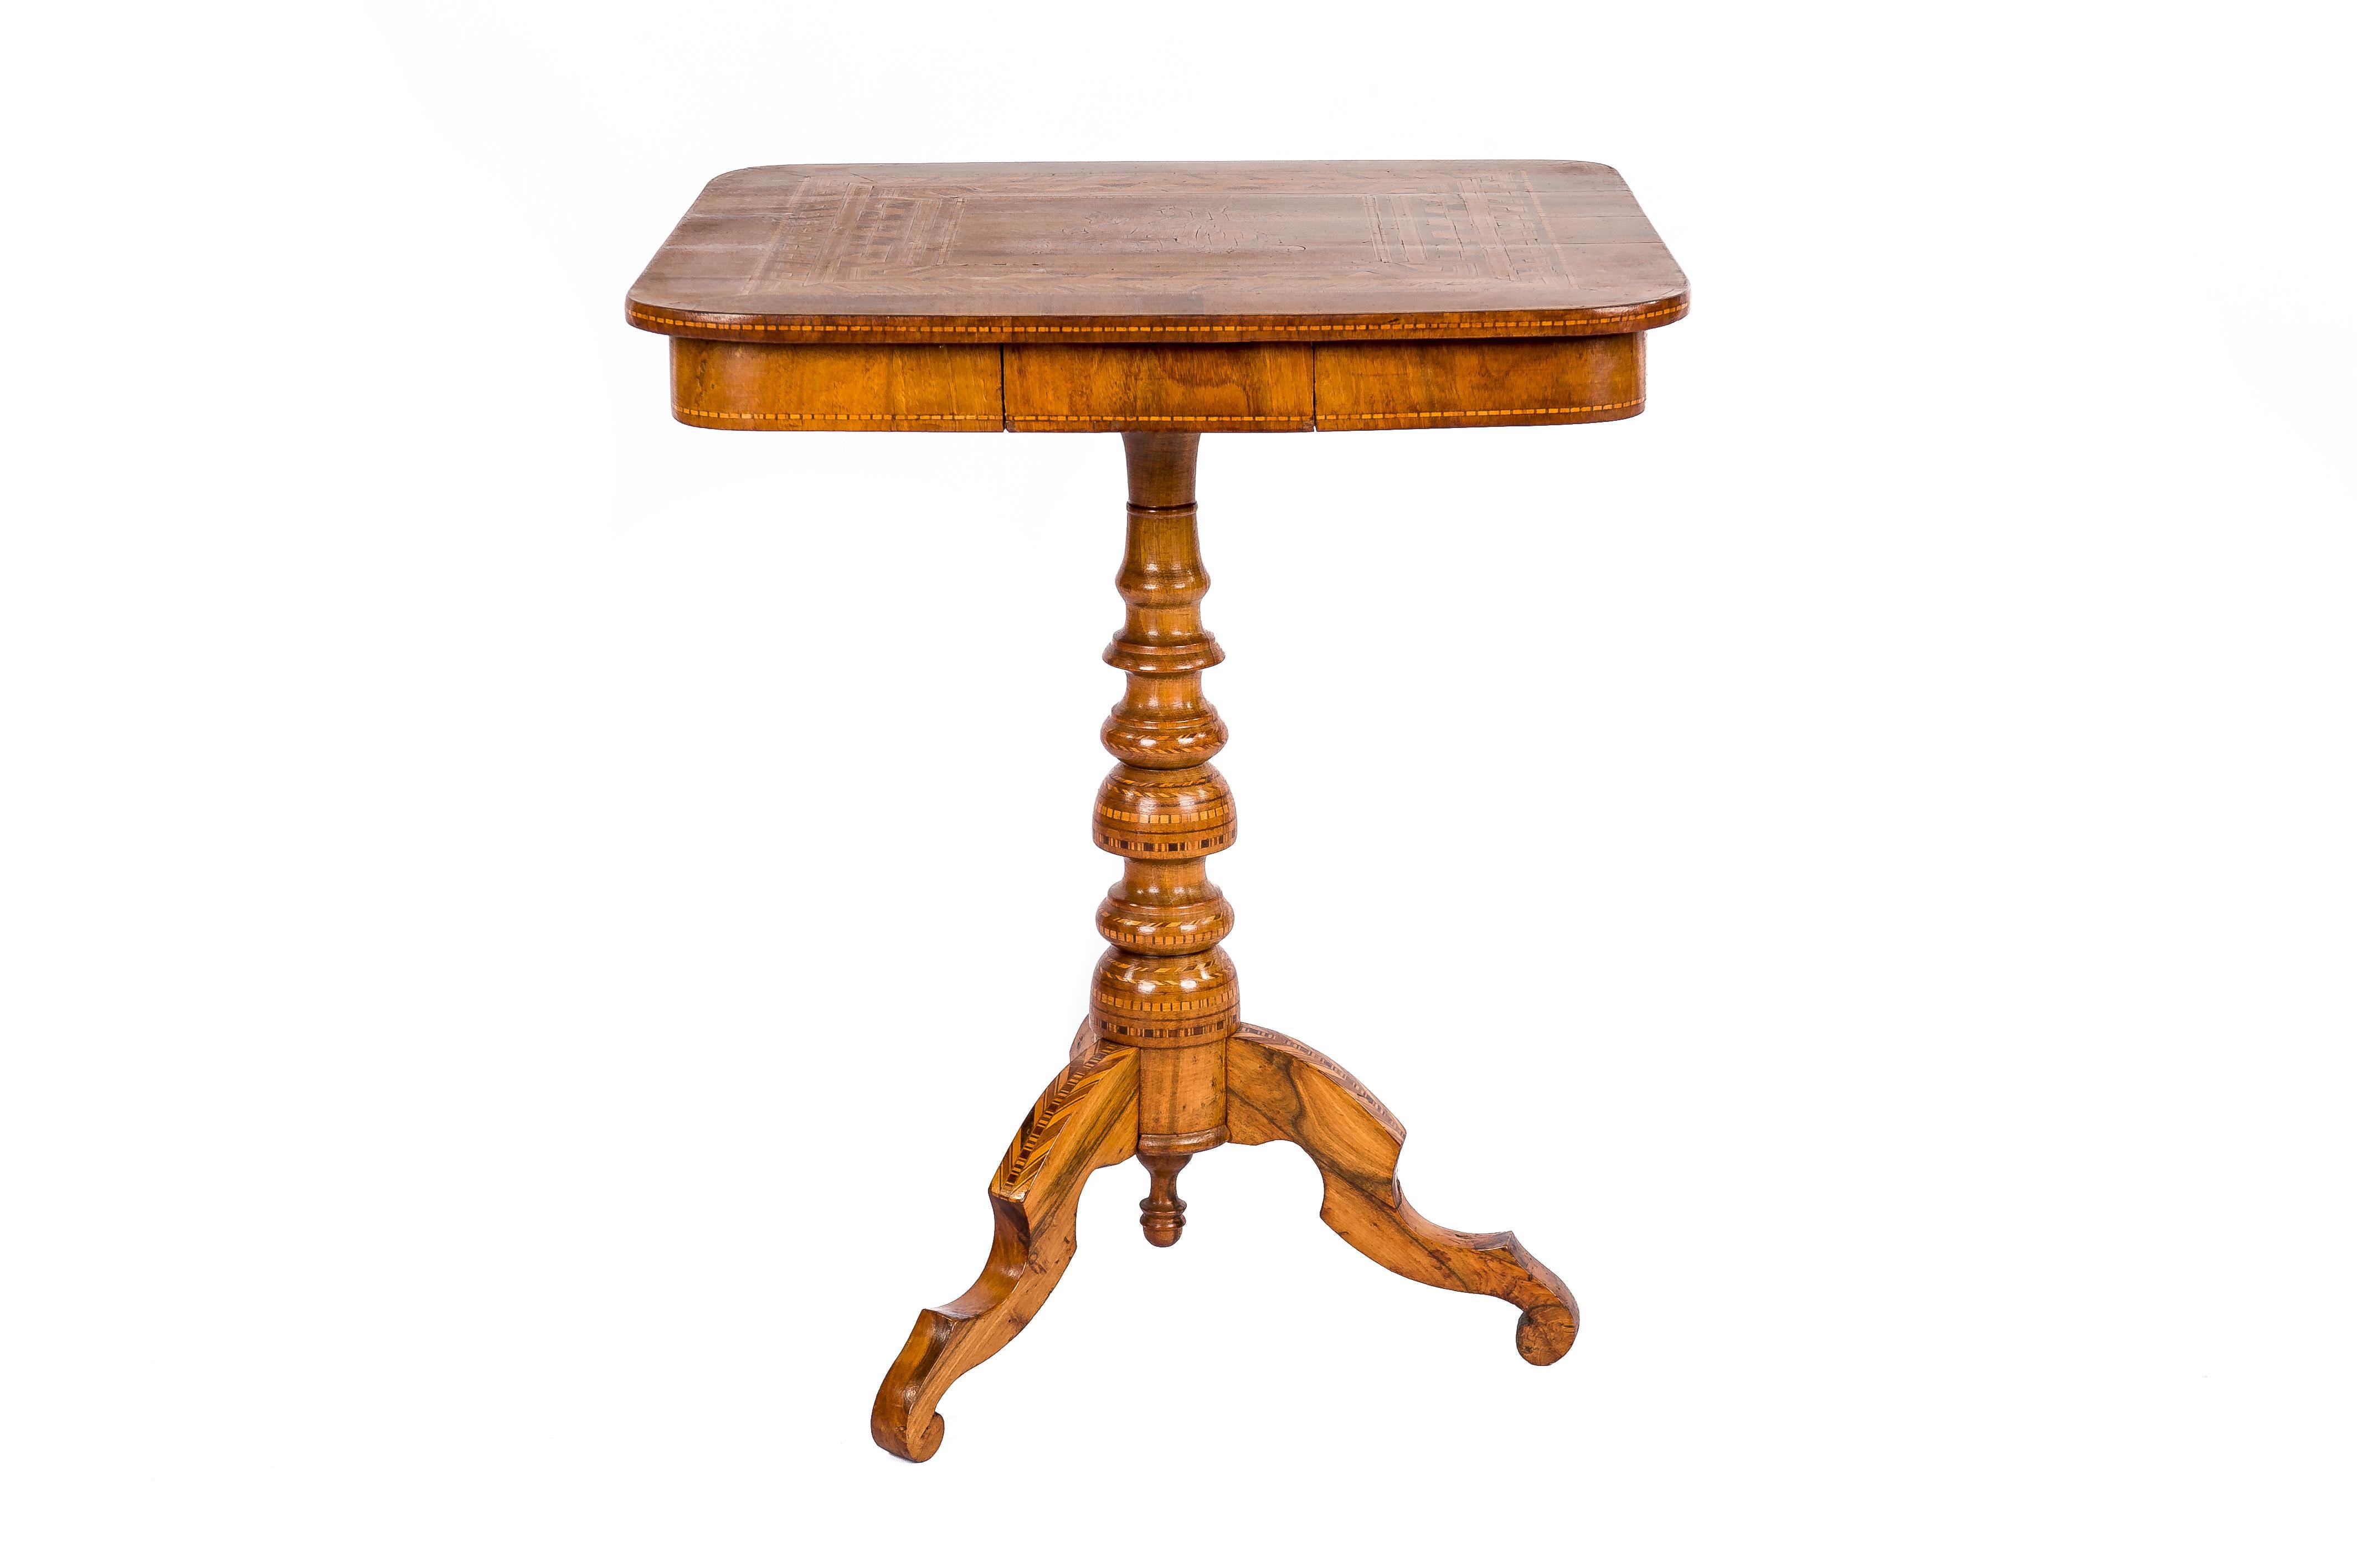 Neoclassical Antique 19th Century Italian Walnut Sorrento Occasional Table with Intarsia For Sale